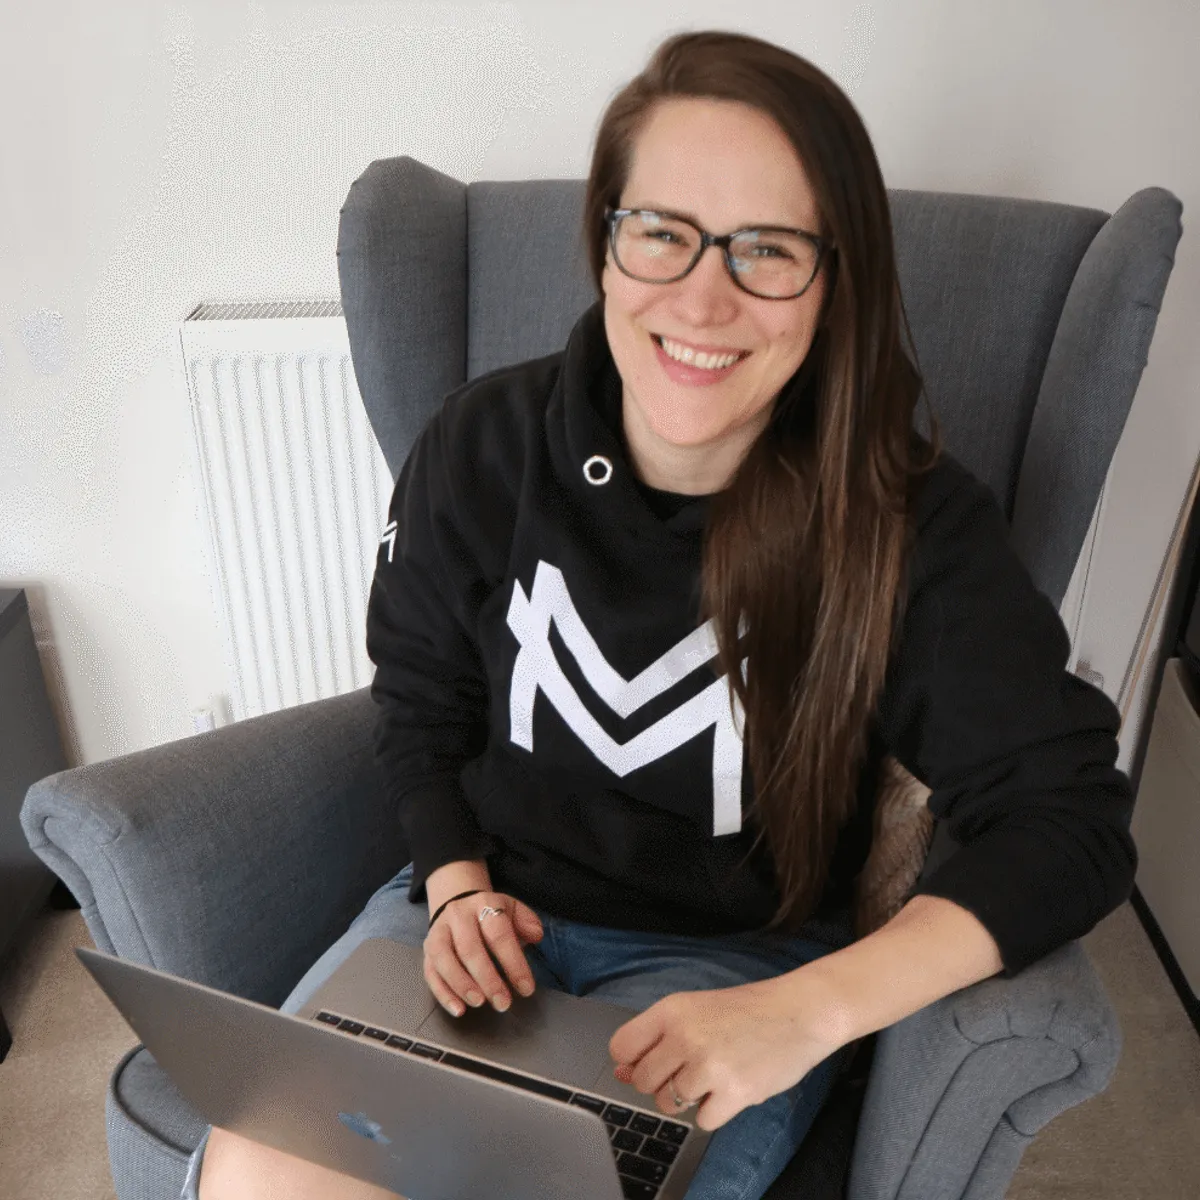 Ash smiling on a chair and laptop